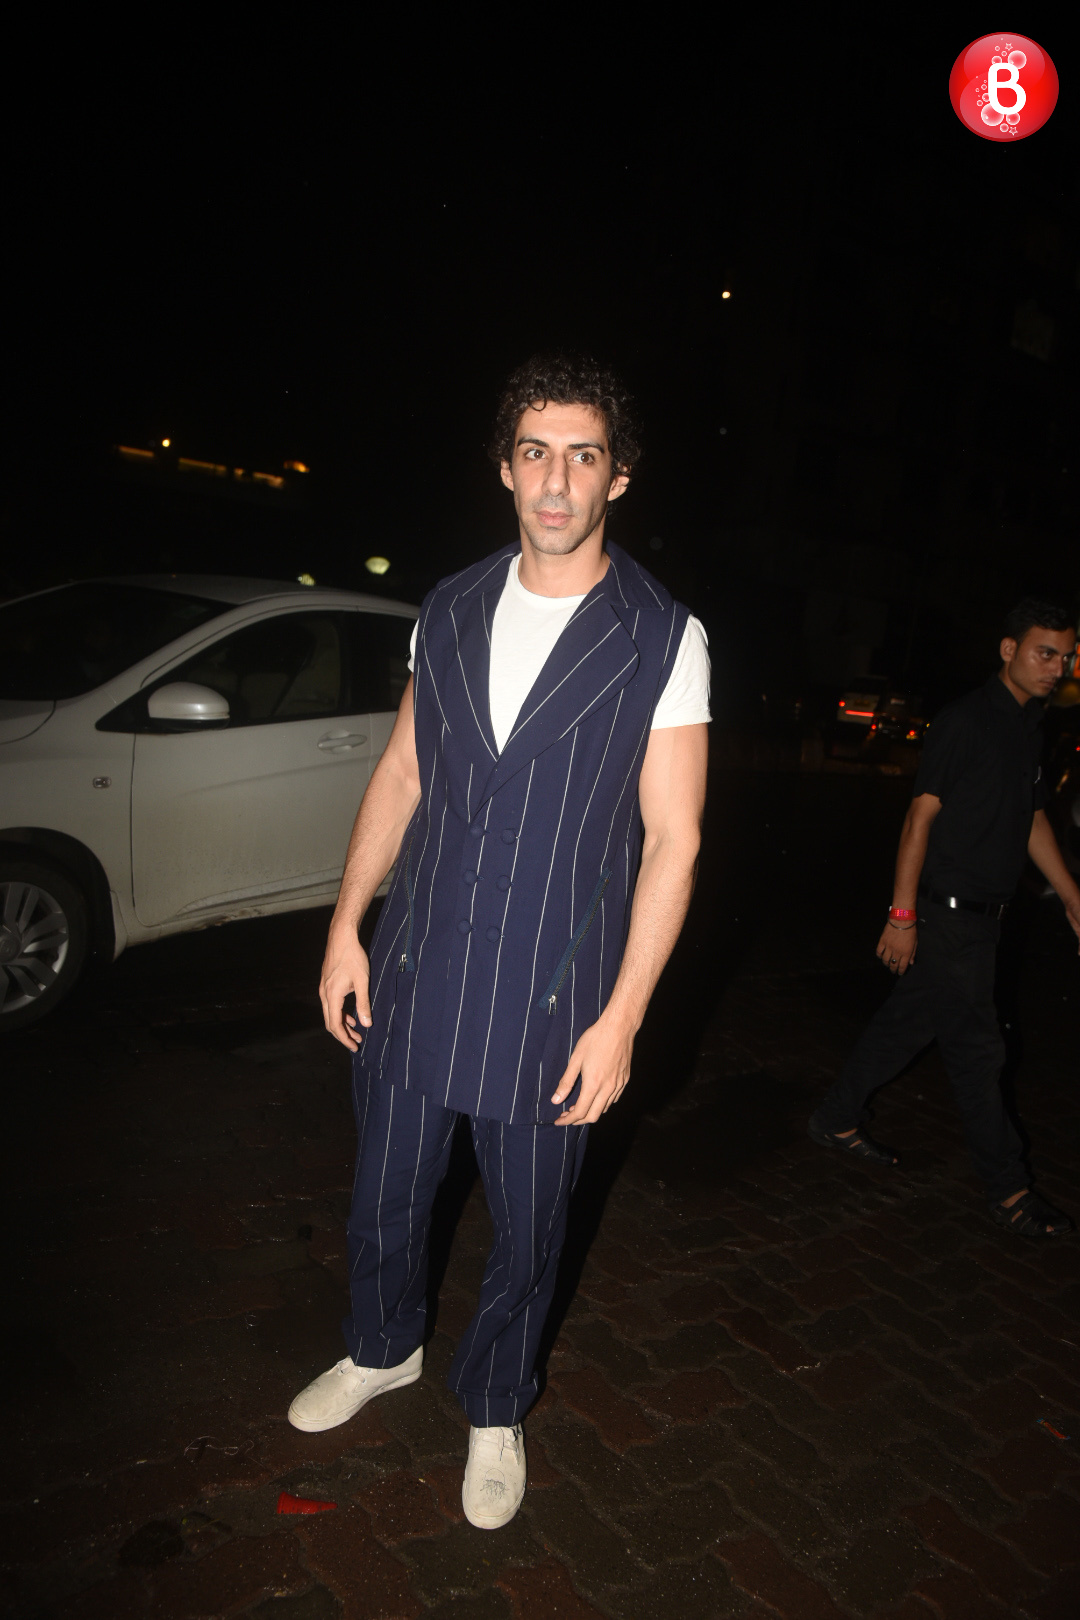 Jim Sarbh at apple party